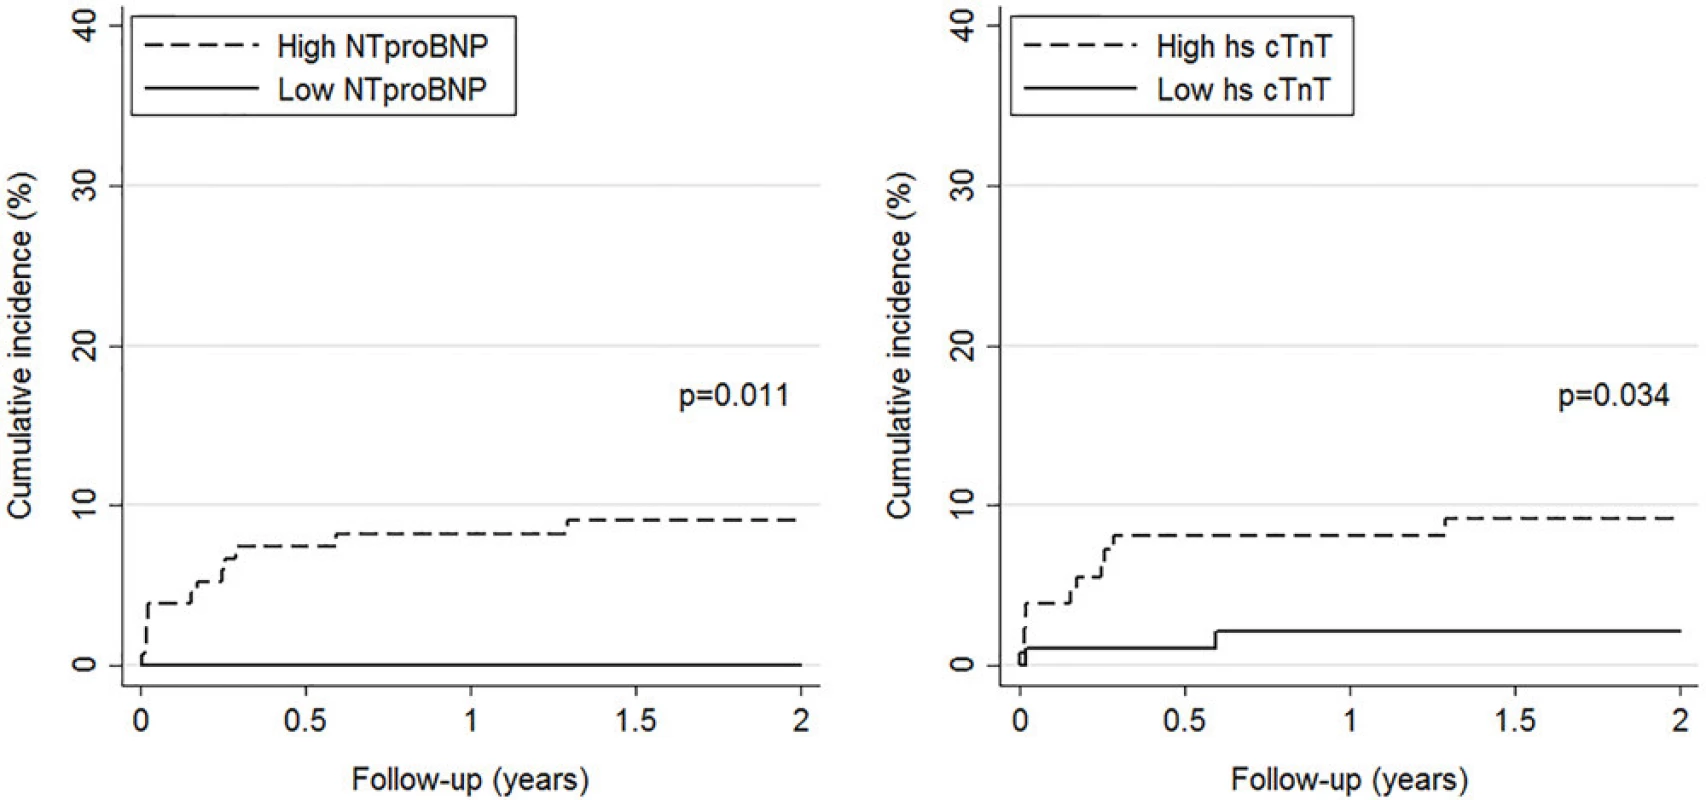 Cumulative incidence of PE-related mortality by level of NT-proBNP (left panel) and hs-cTnT (right panel). High versus low levels are based on pre-specified cut-offs (>300 pg/mL for NT-proBNP and >14 ng/L for hs-cTnT).